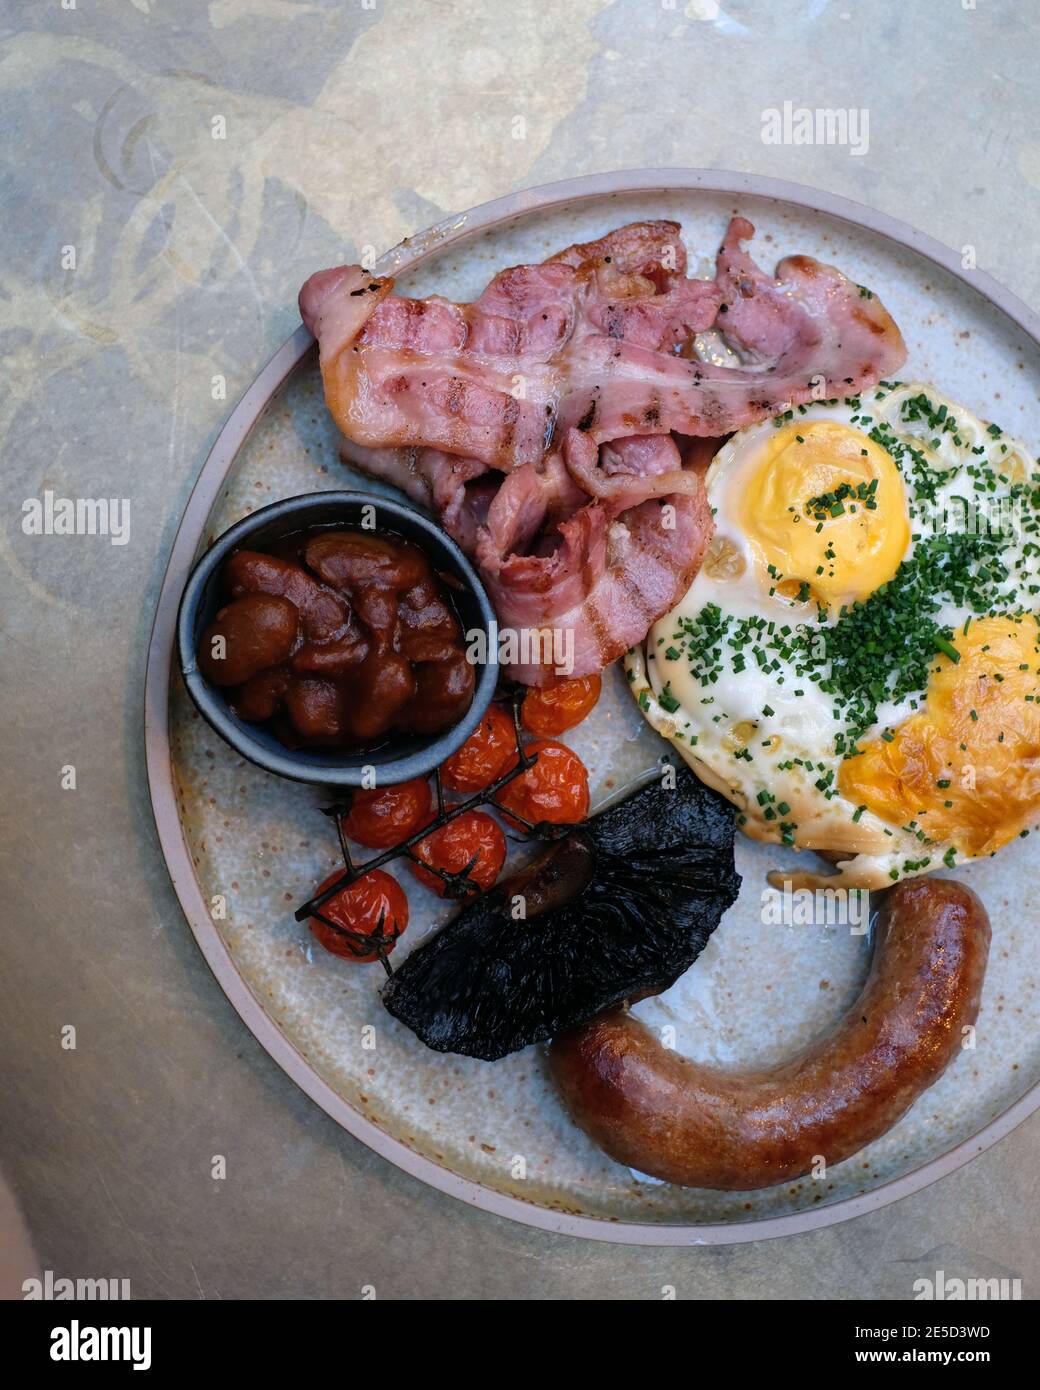 Full English Breakfast with fried eggs, bacon, roasted tomatoes, roasted mushrooms, baked beans, parsley and pork sausage Stock Photo